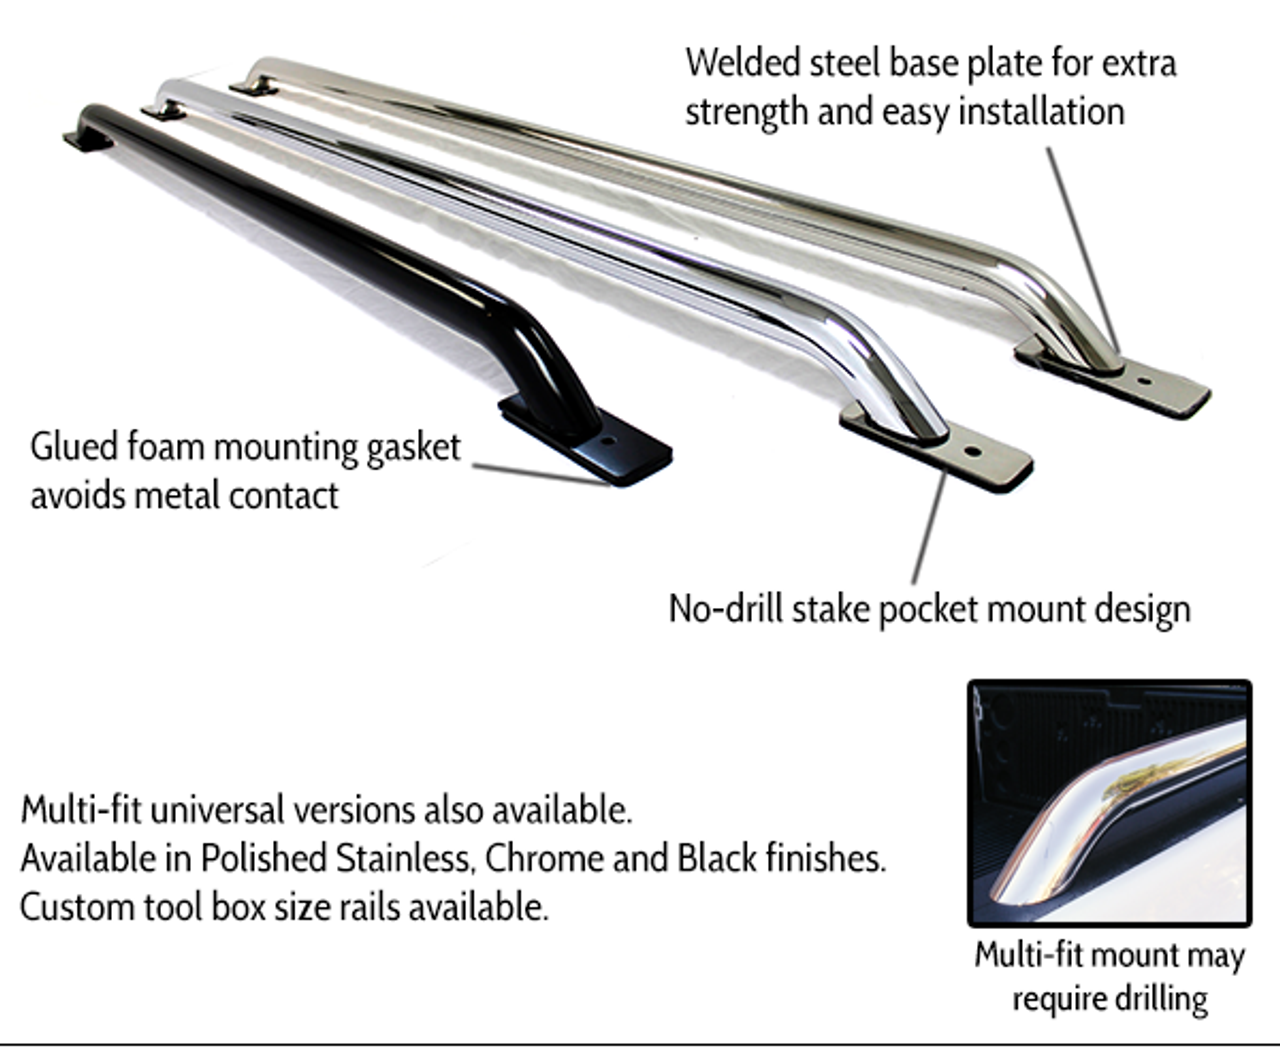 Go Rhino 8067UC Universal Bed Rails, 67 inch Long, Without base plates, Chrome Mild Steel, Mounting Kit Included, Fits Ford Chevrolet Toyota Jeep, Dodge, Nissan, Buick GMC